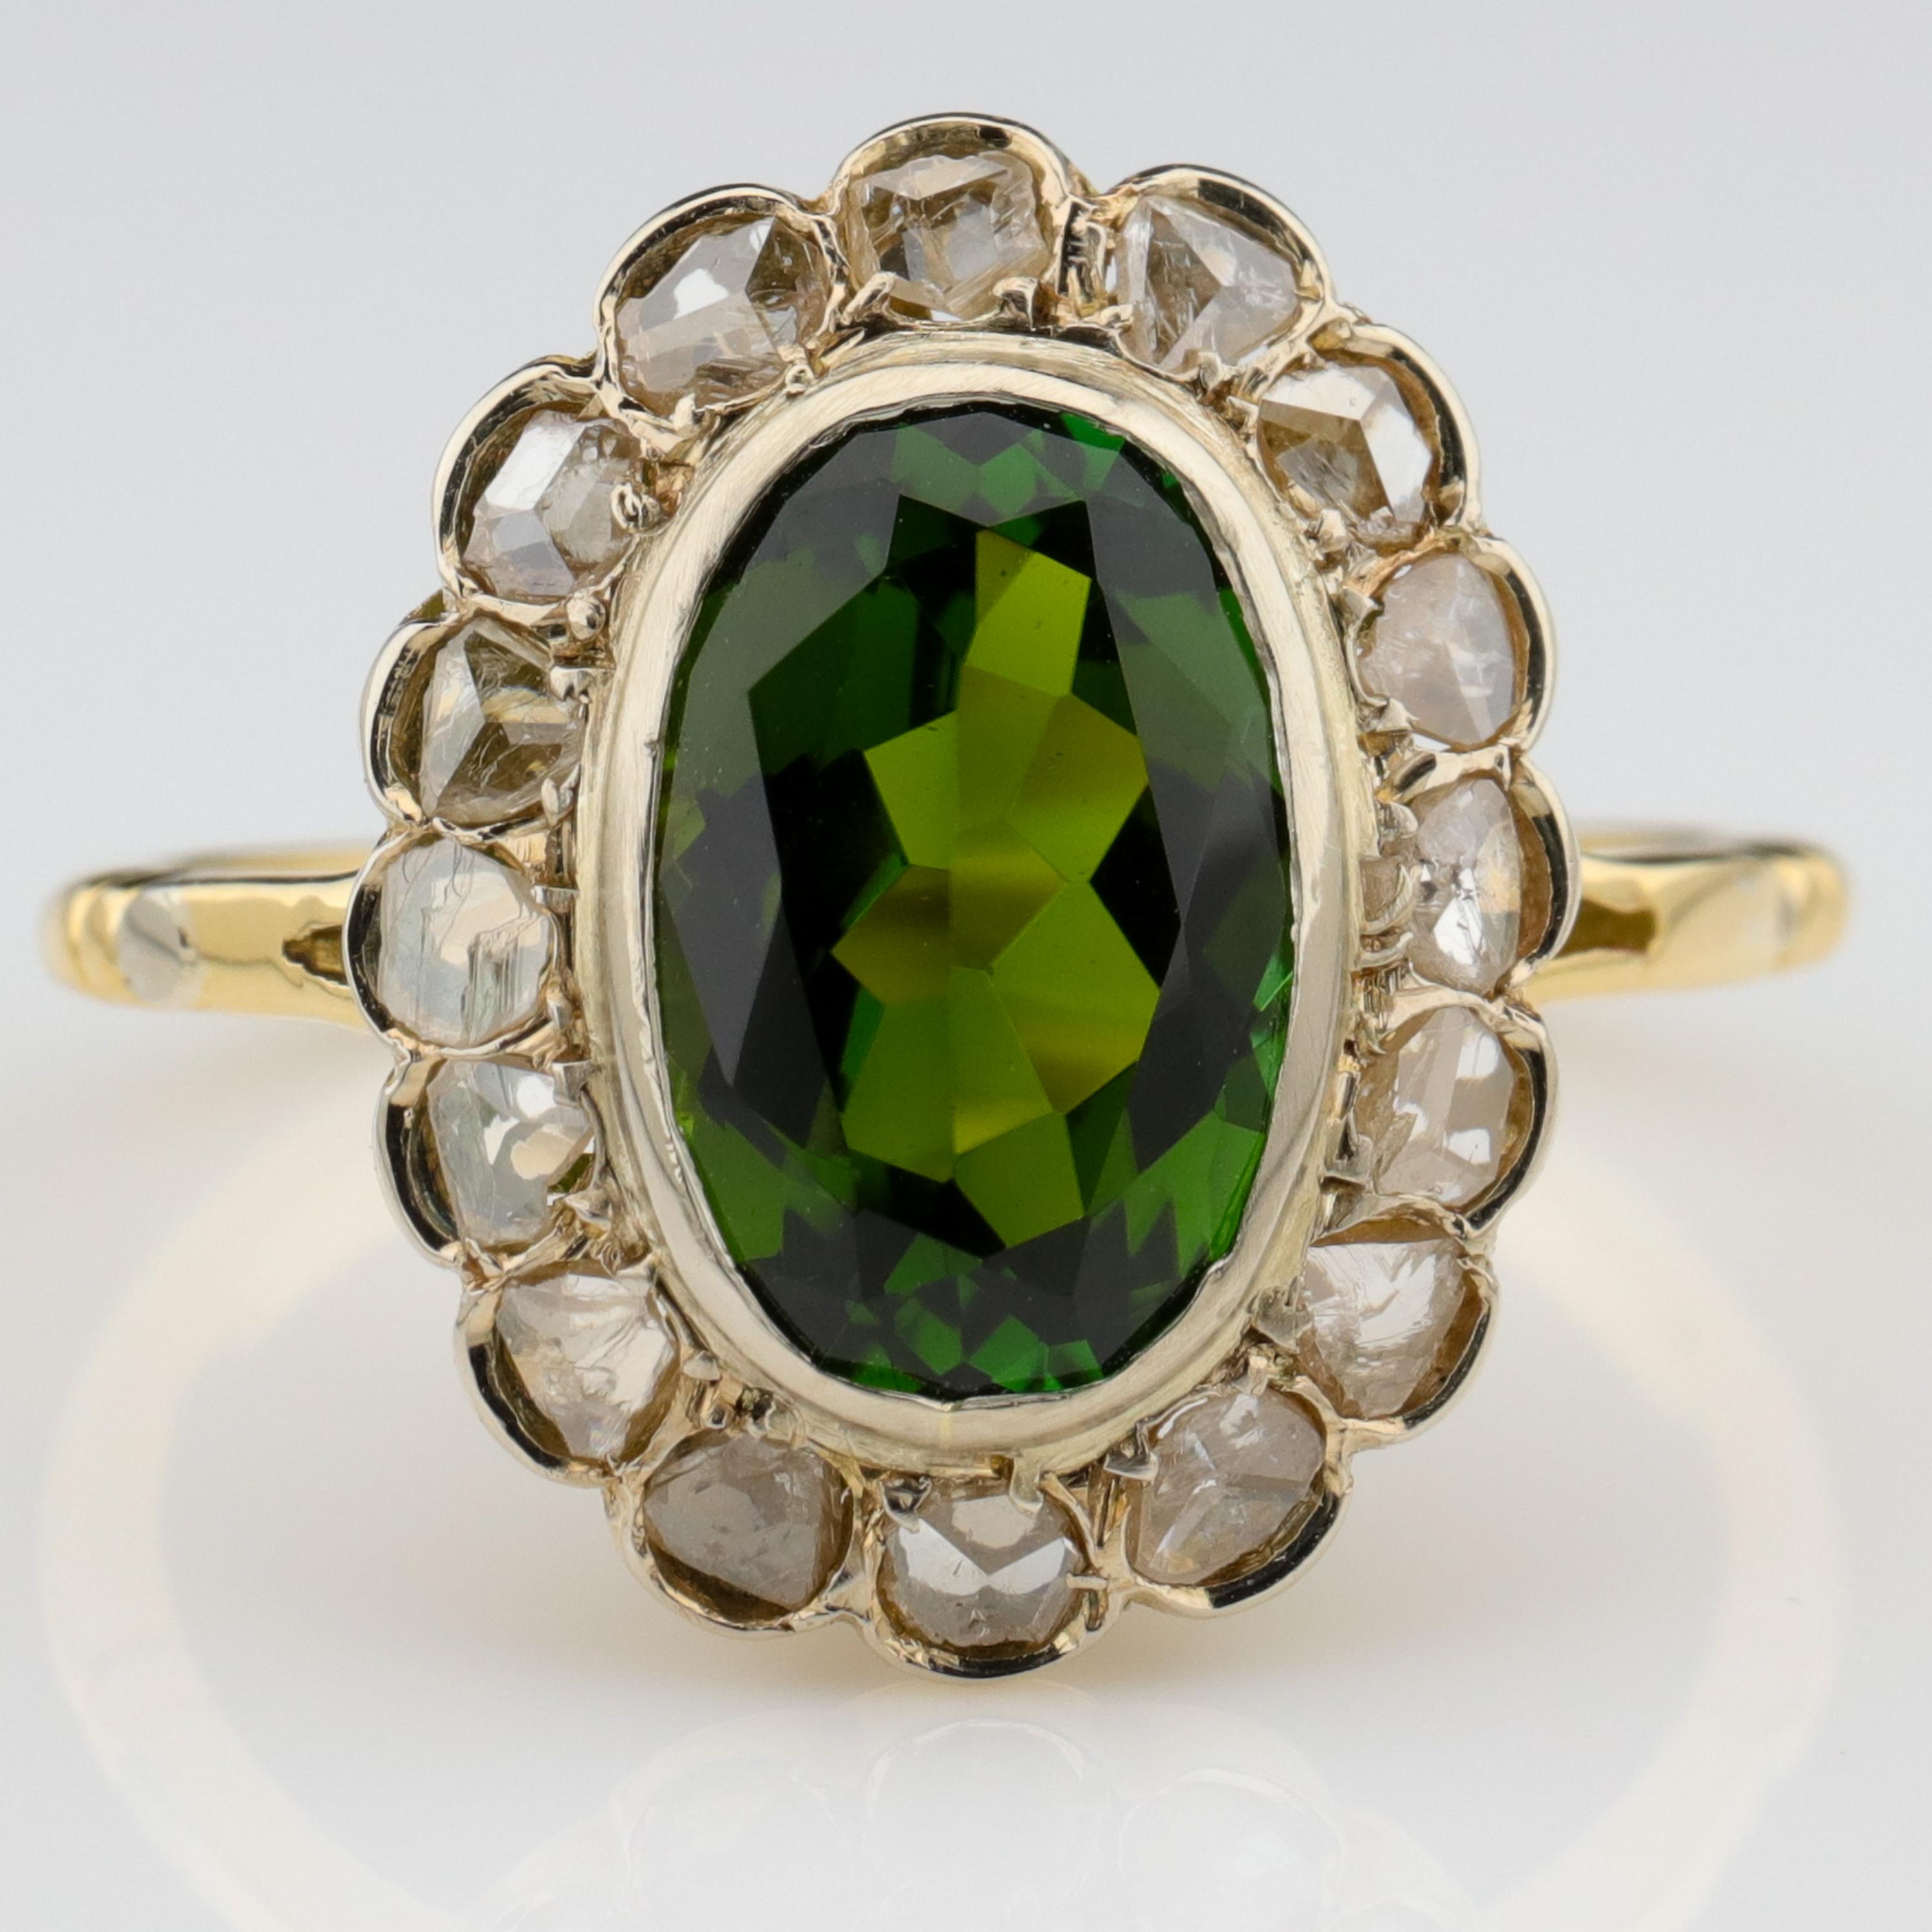 Chrome tourmaline is a deep forest-green tourmaline that is named after the chromium which gives the gem its rich, deep green. Ordinary green tourmaline is not rare; chrome tourmaline is considered a collector's gem because it's extremely rare. It